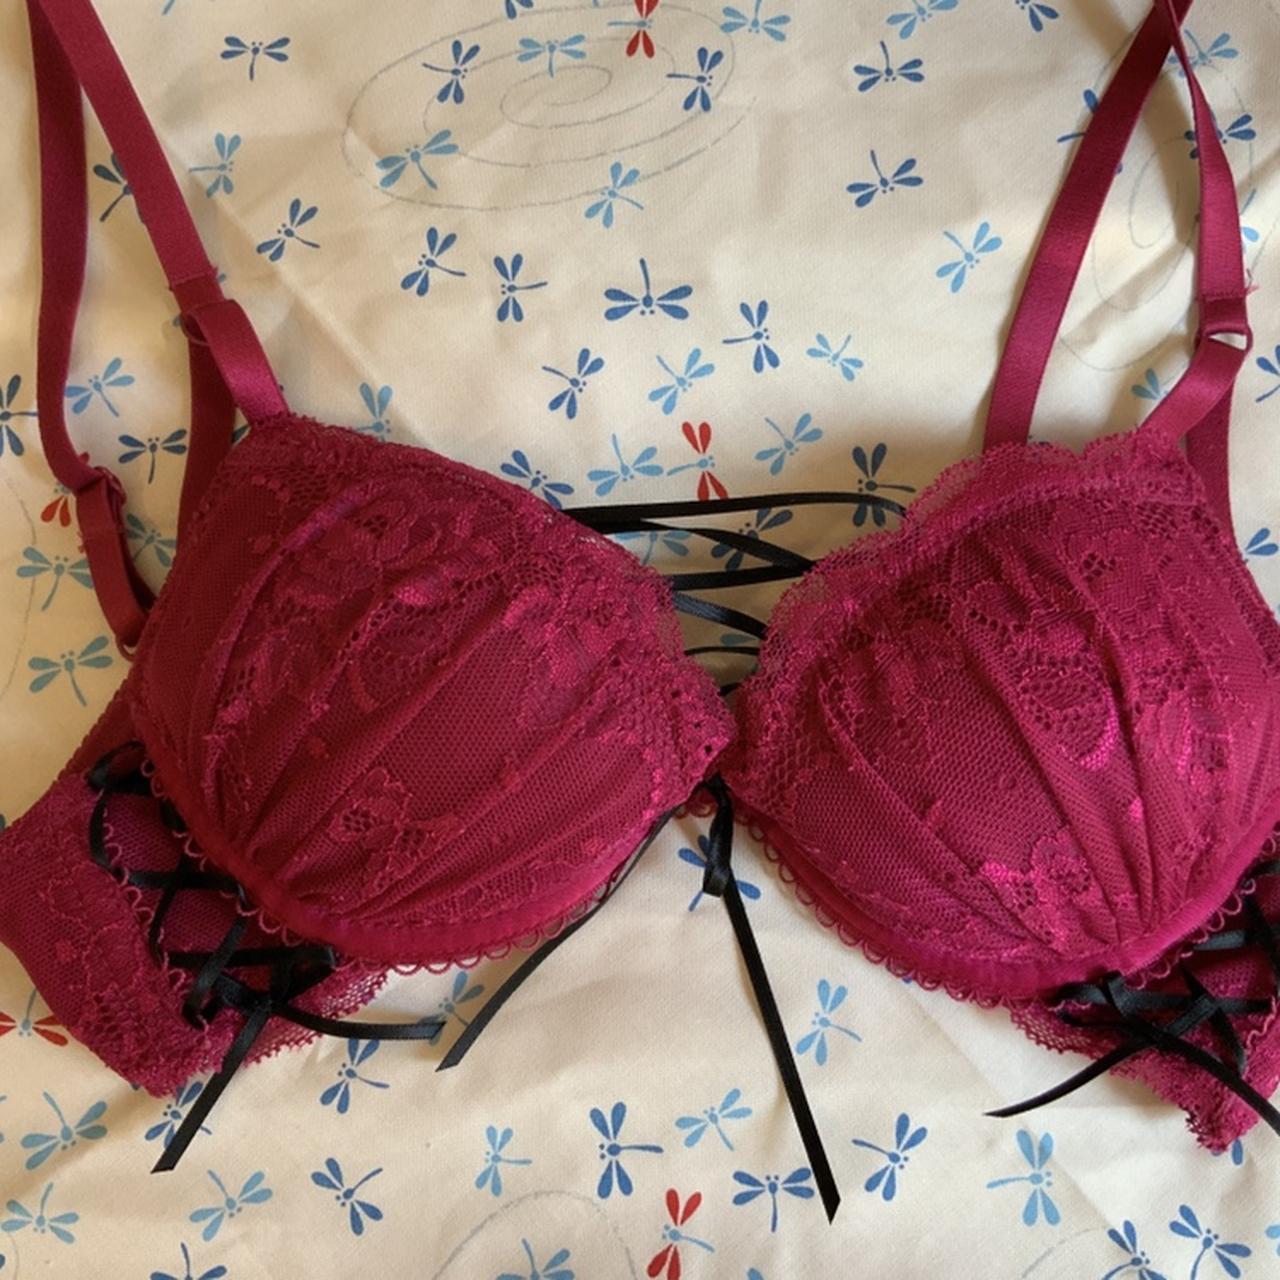 ❣️❣️BRA SIZE IN JAPANESE❣️❣️ B66 = US 30A!! Band size is